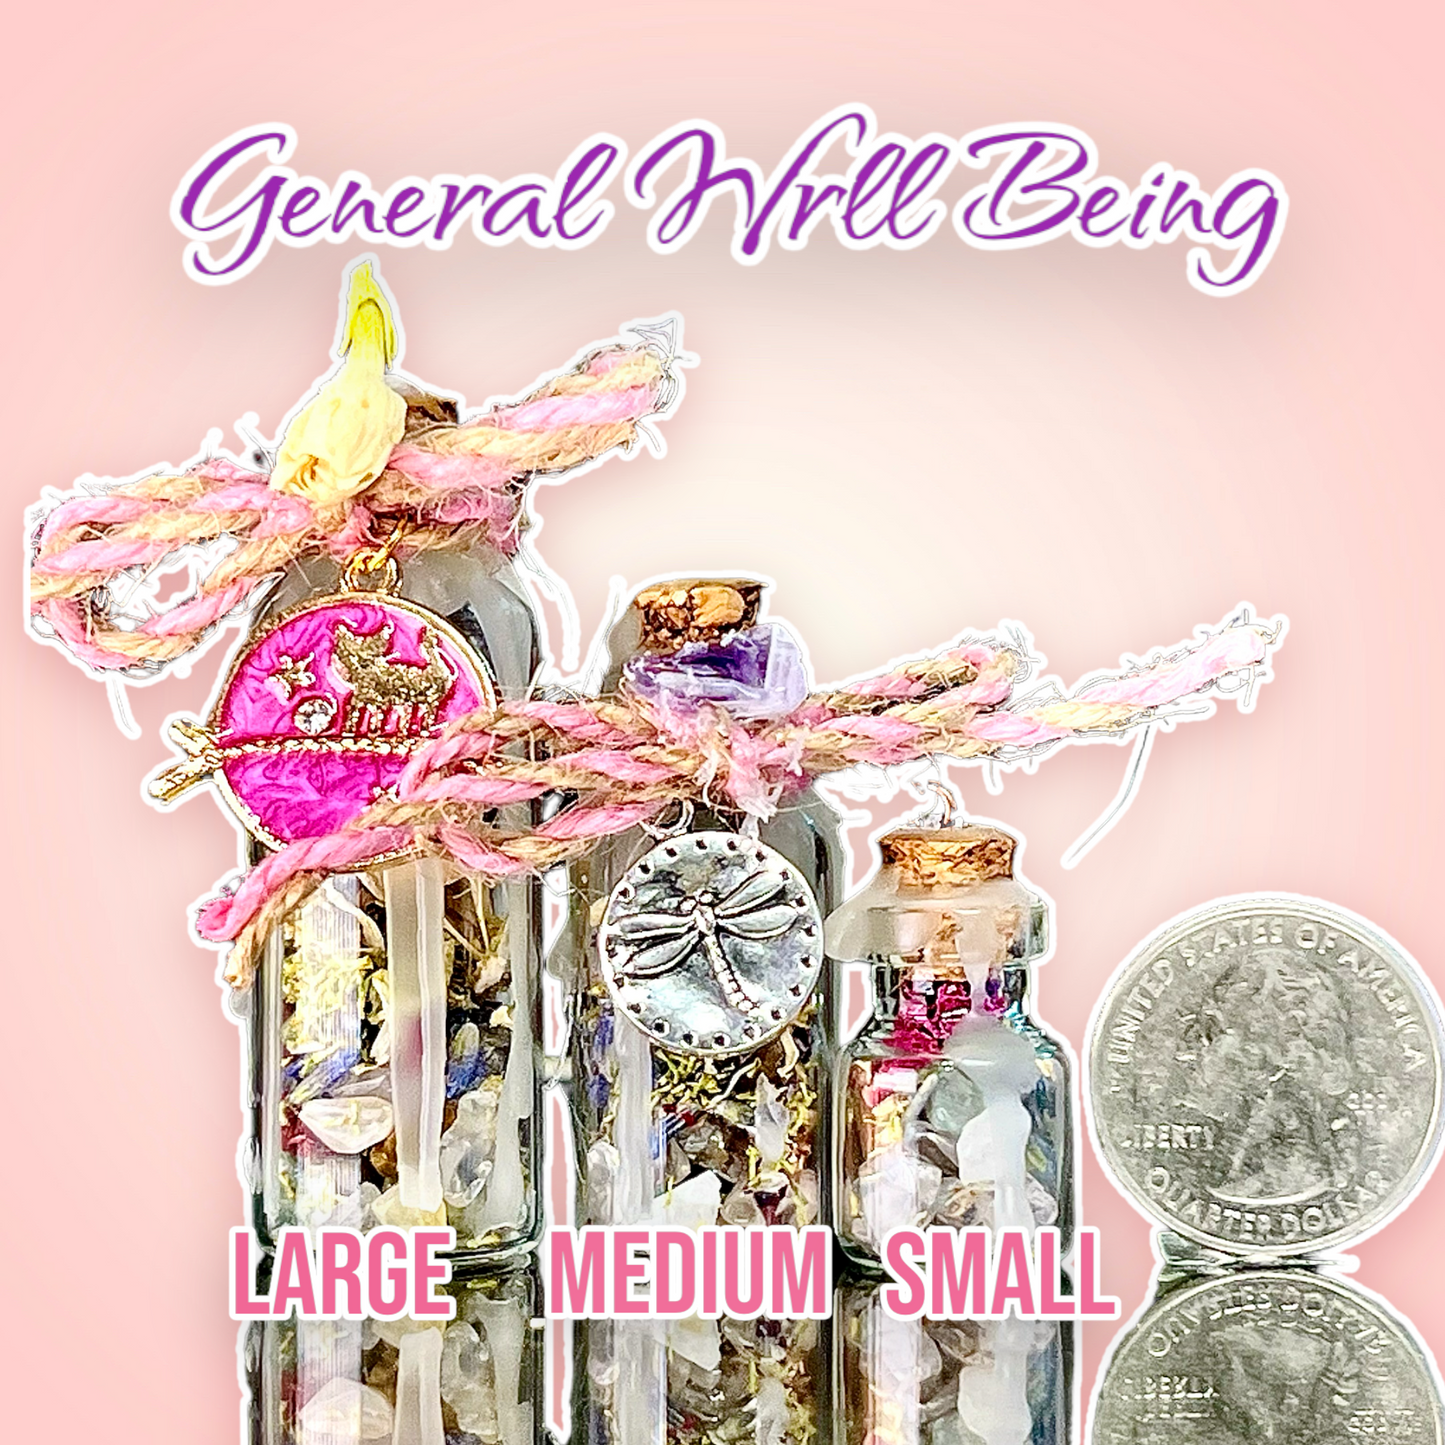 General Well Being Protection Bottled Charms